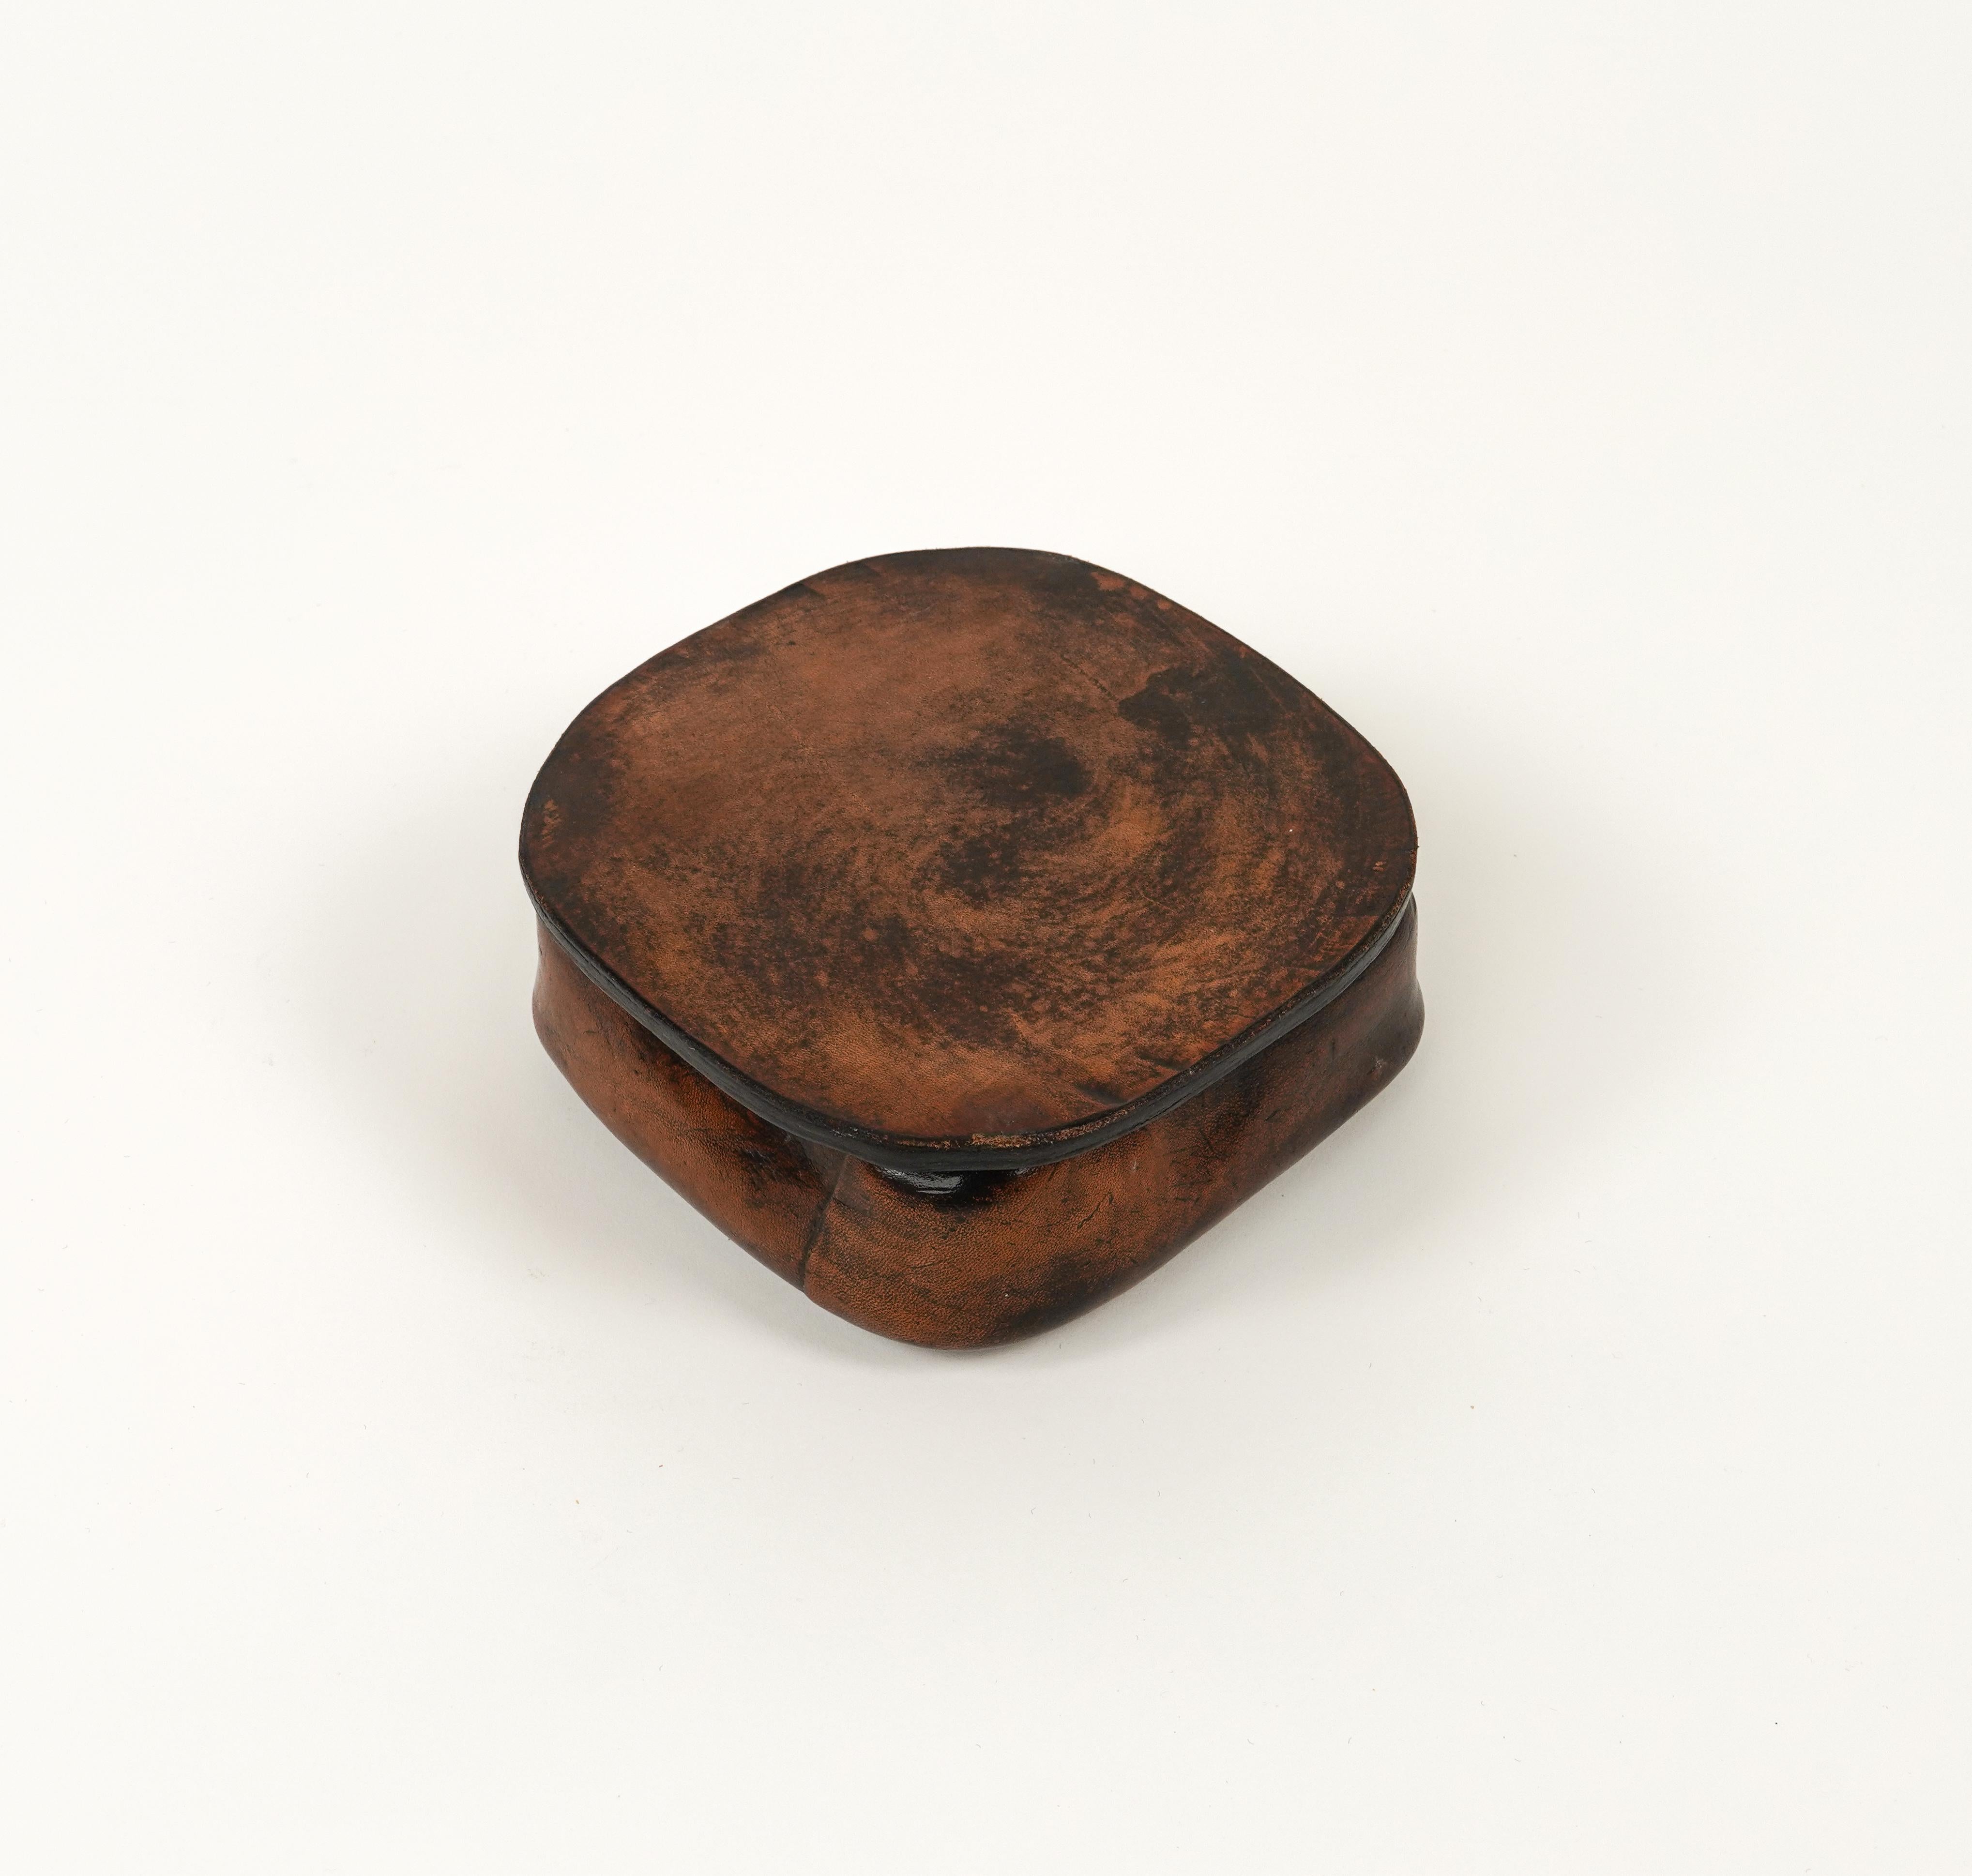 Midcentury Squared Ashtray in Leather and Glass Jacques Adnet Style, Italy 1970s For Sale 9